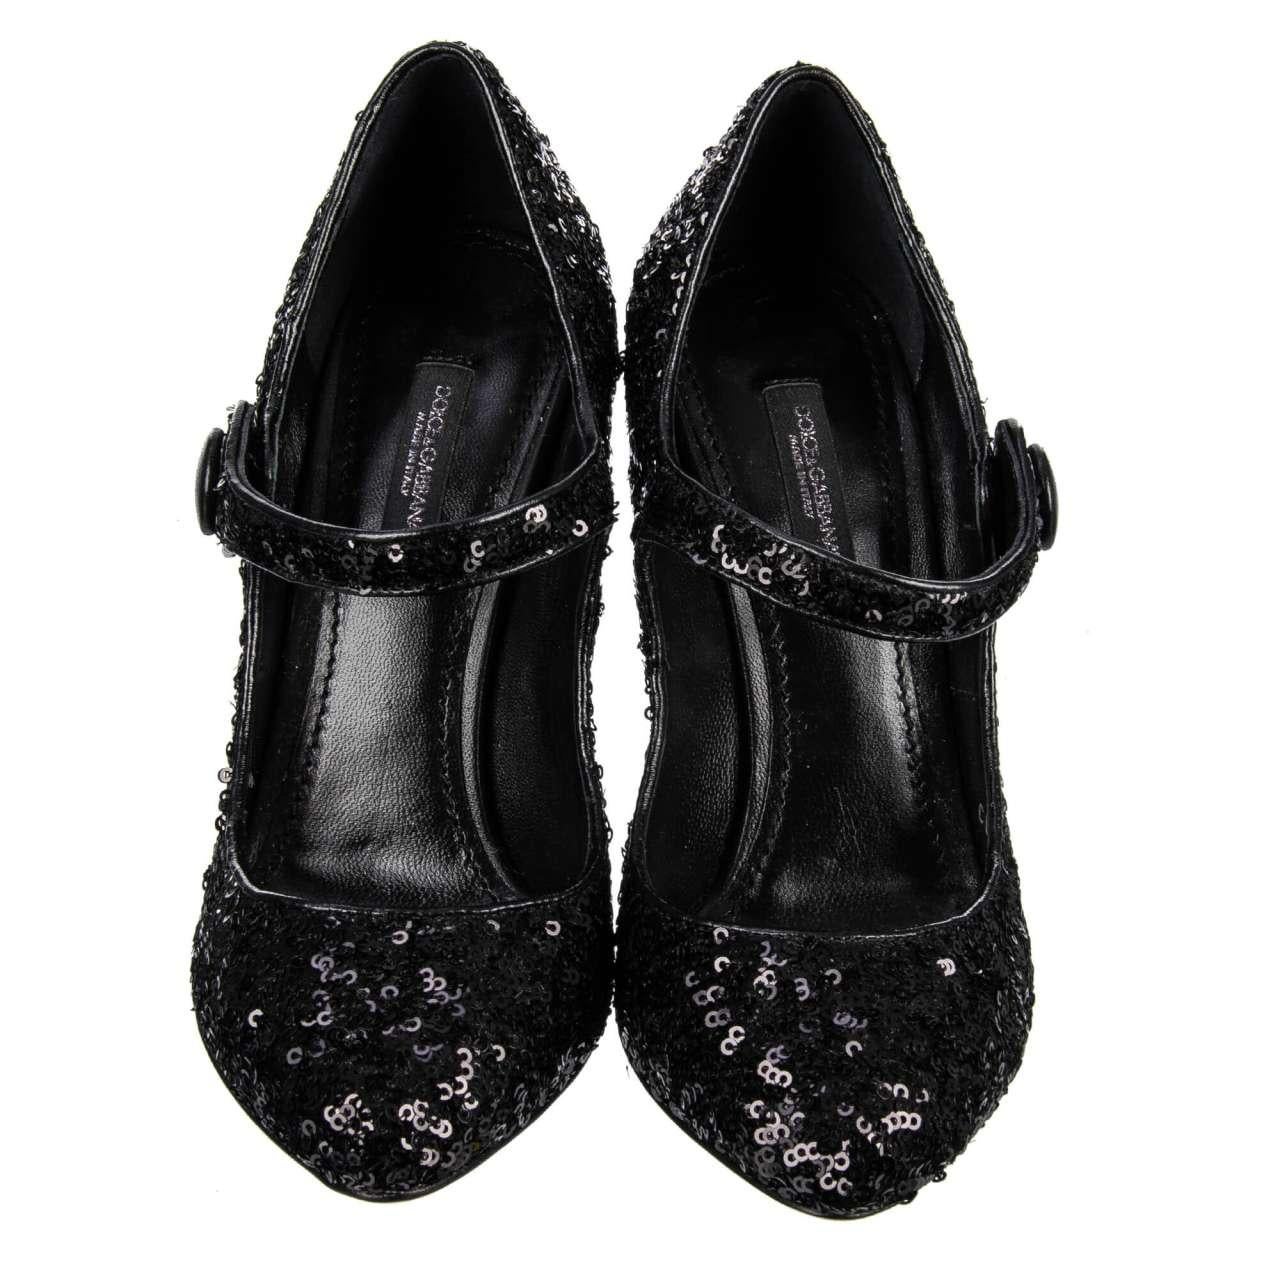 Dolce & Gabbana - Sequined Mary Janes VALLY Black EUR 35.5 In Excellent Condition For Sale In Erkrath, DE